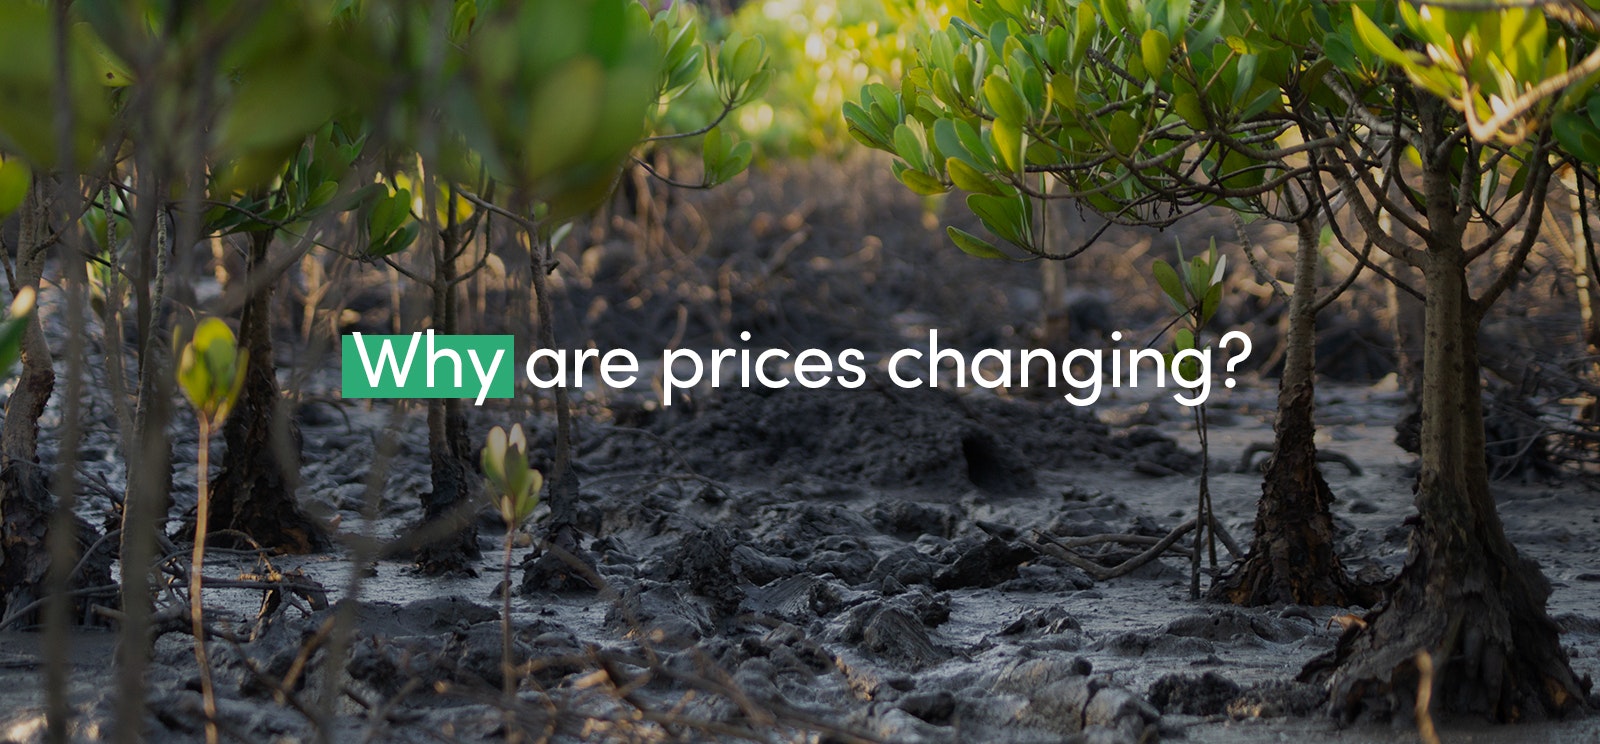 Why are prices changing?